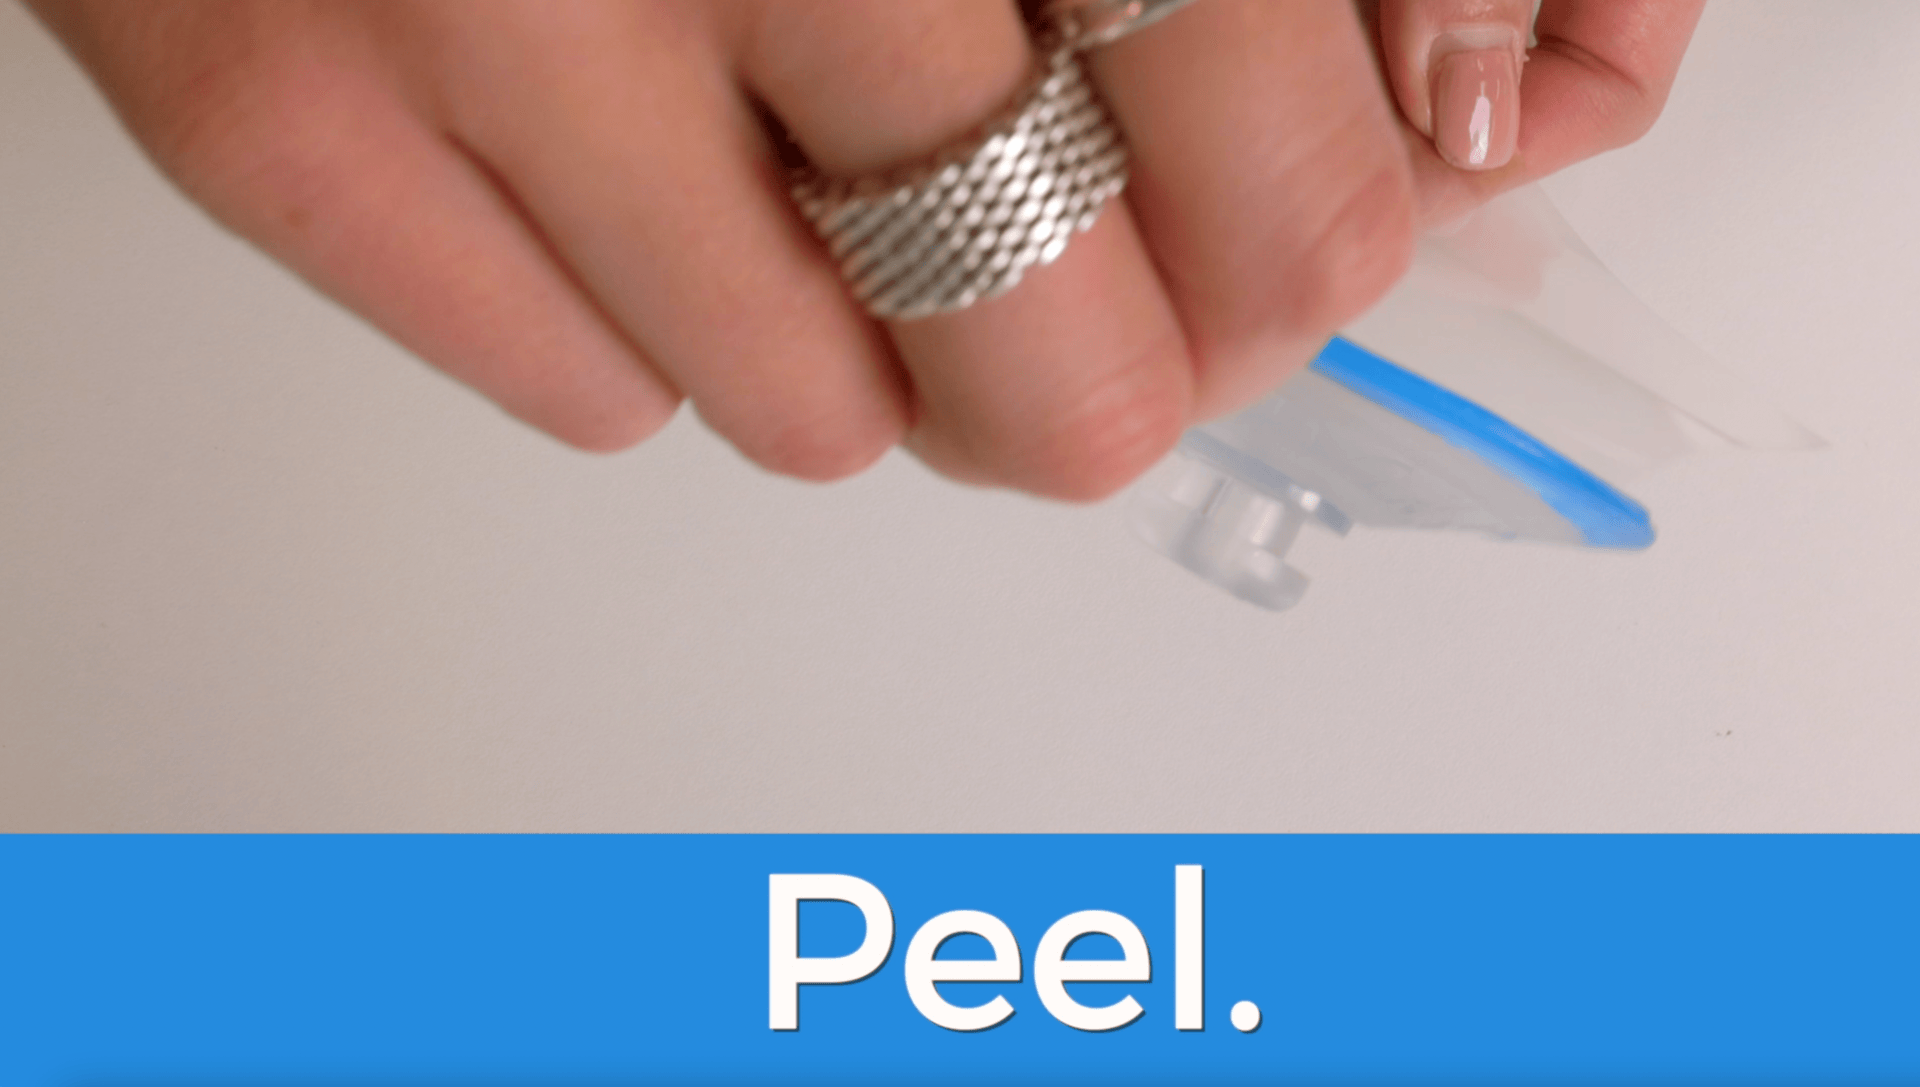 1. Peel Off The Suction Cup